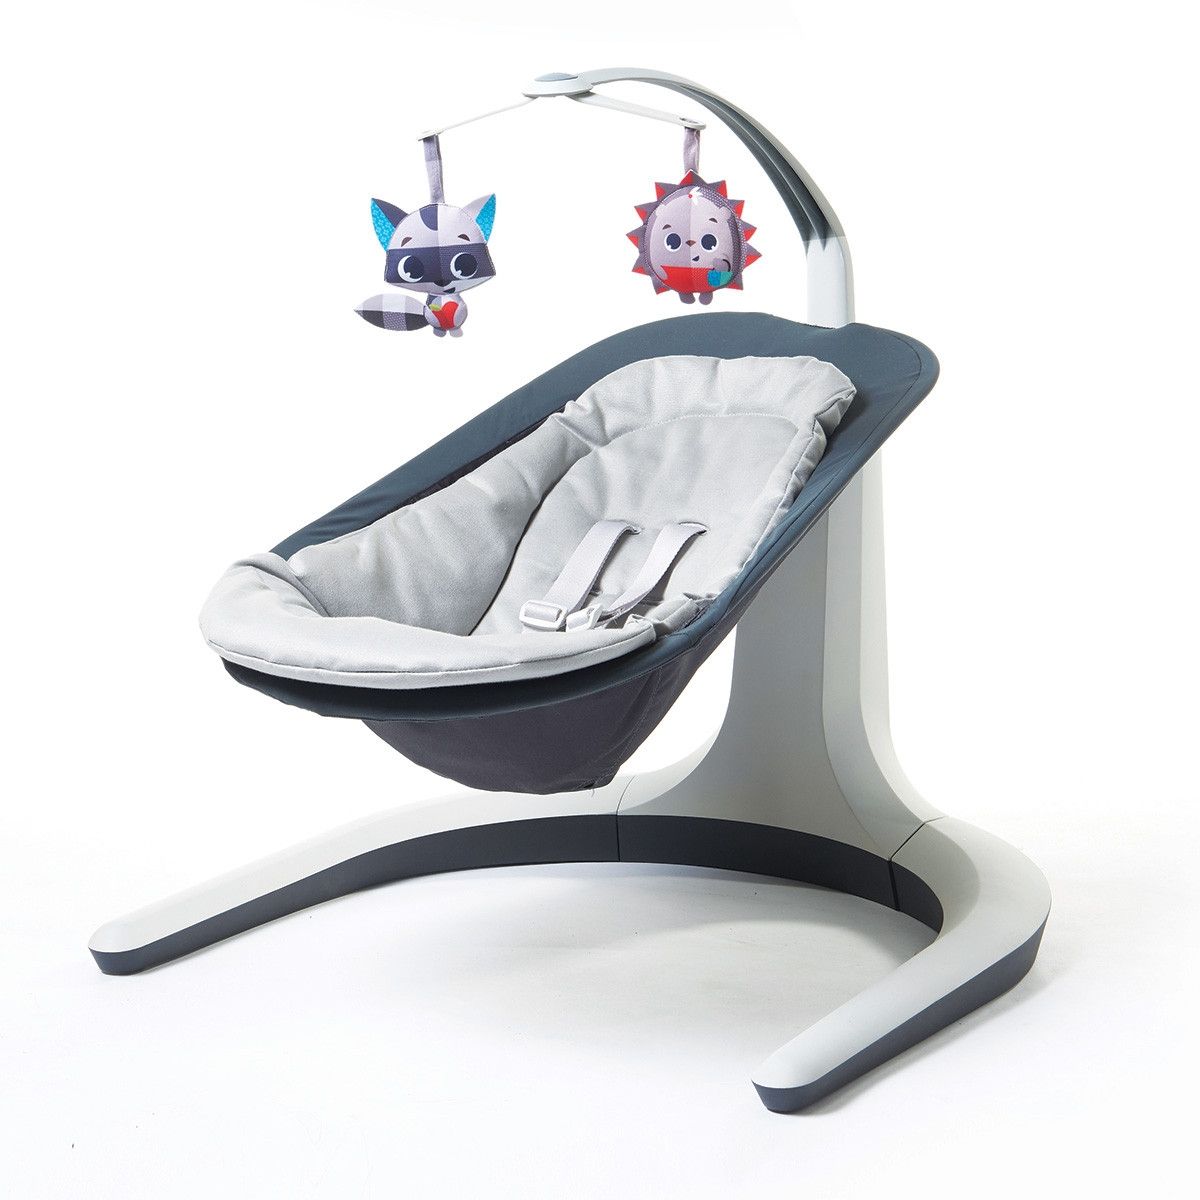 Bouncers - 2 in 1 Baby Bouncer Multifunctional baby Cradle Chair was